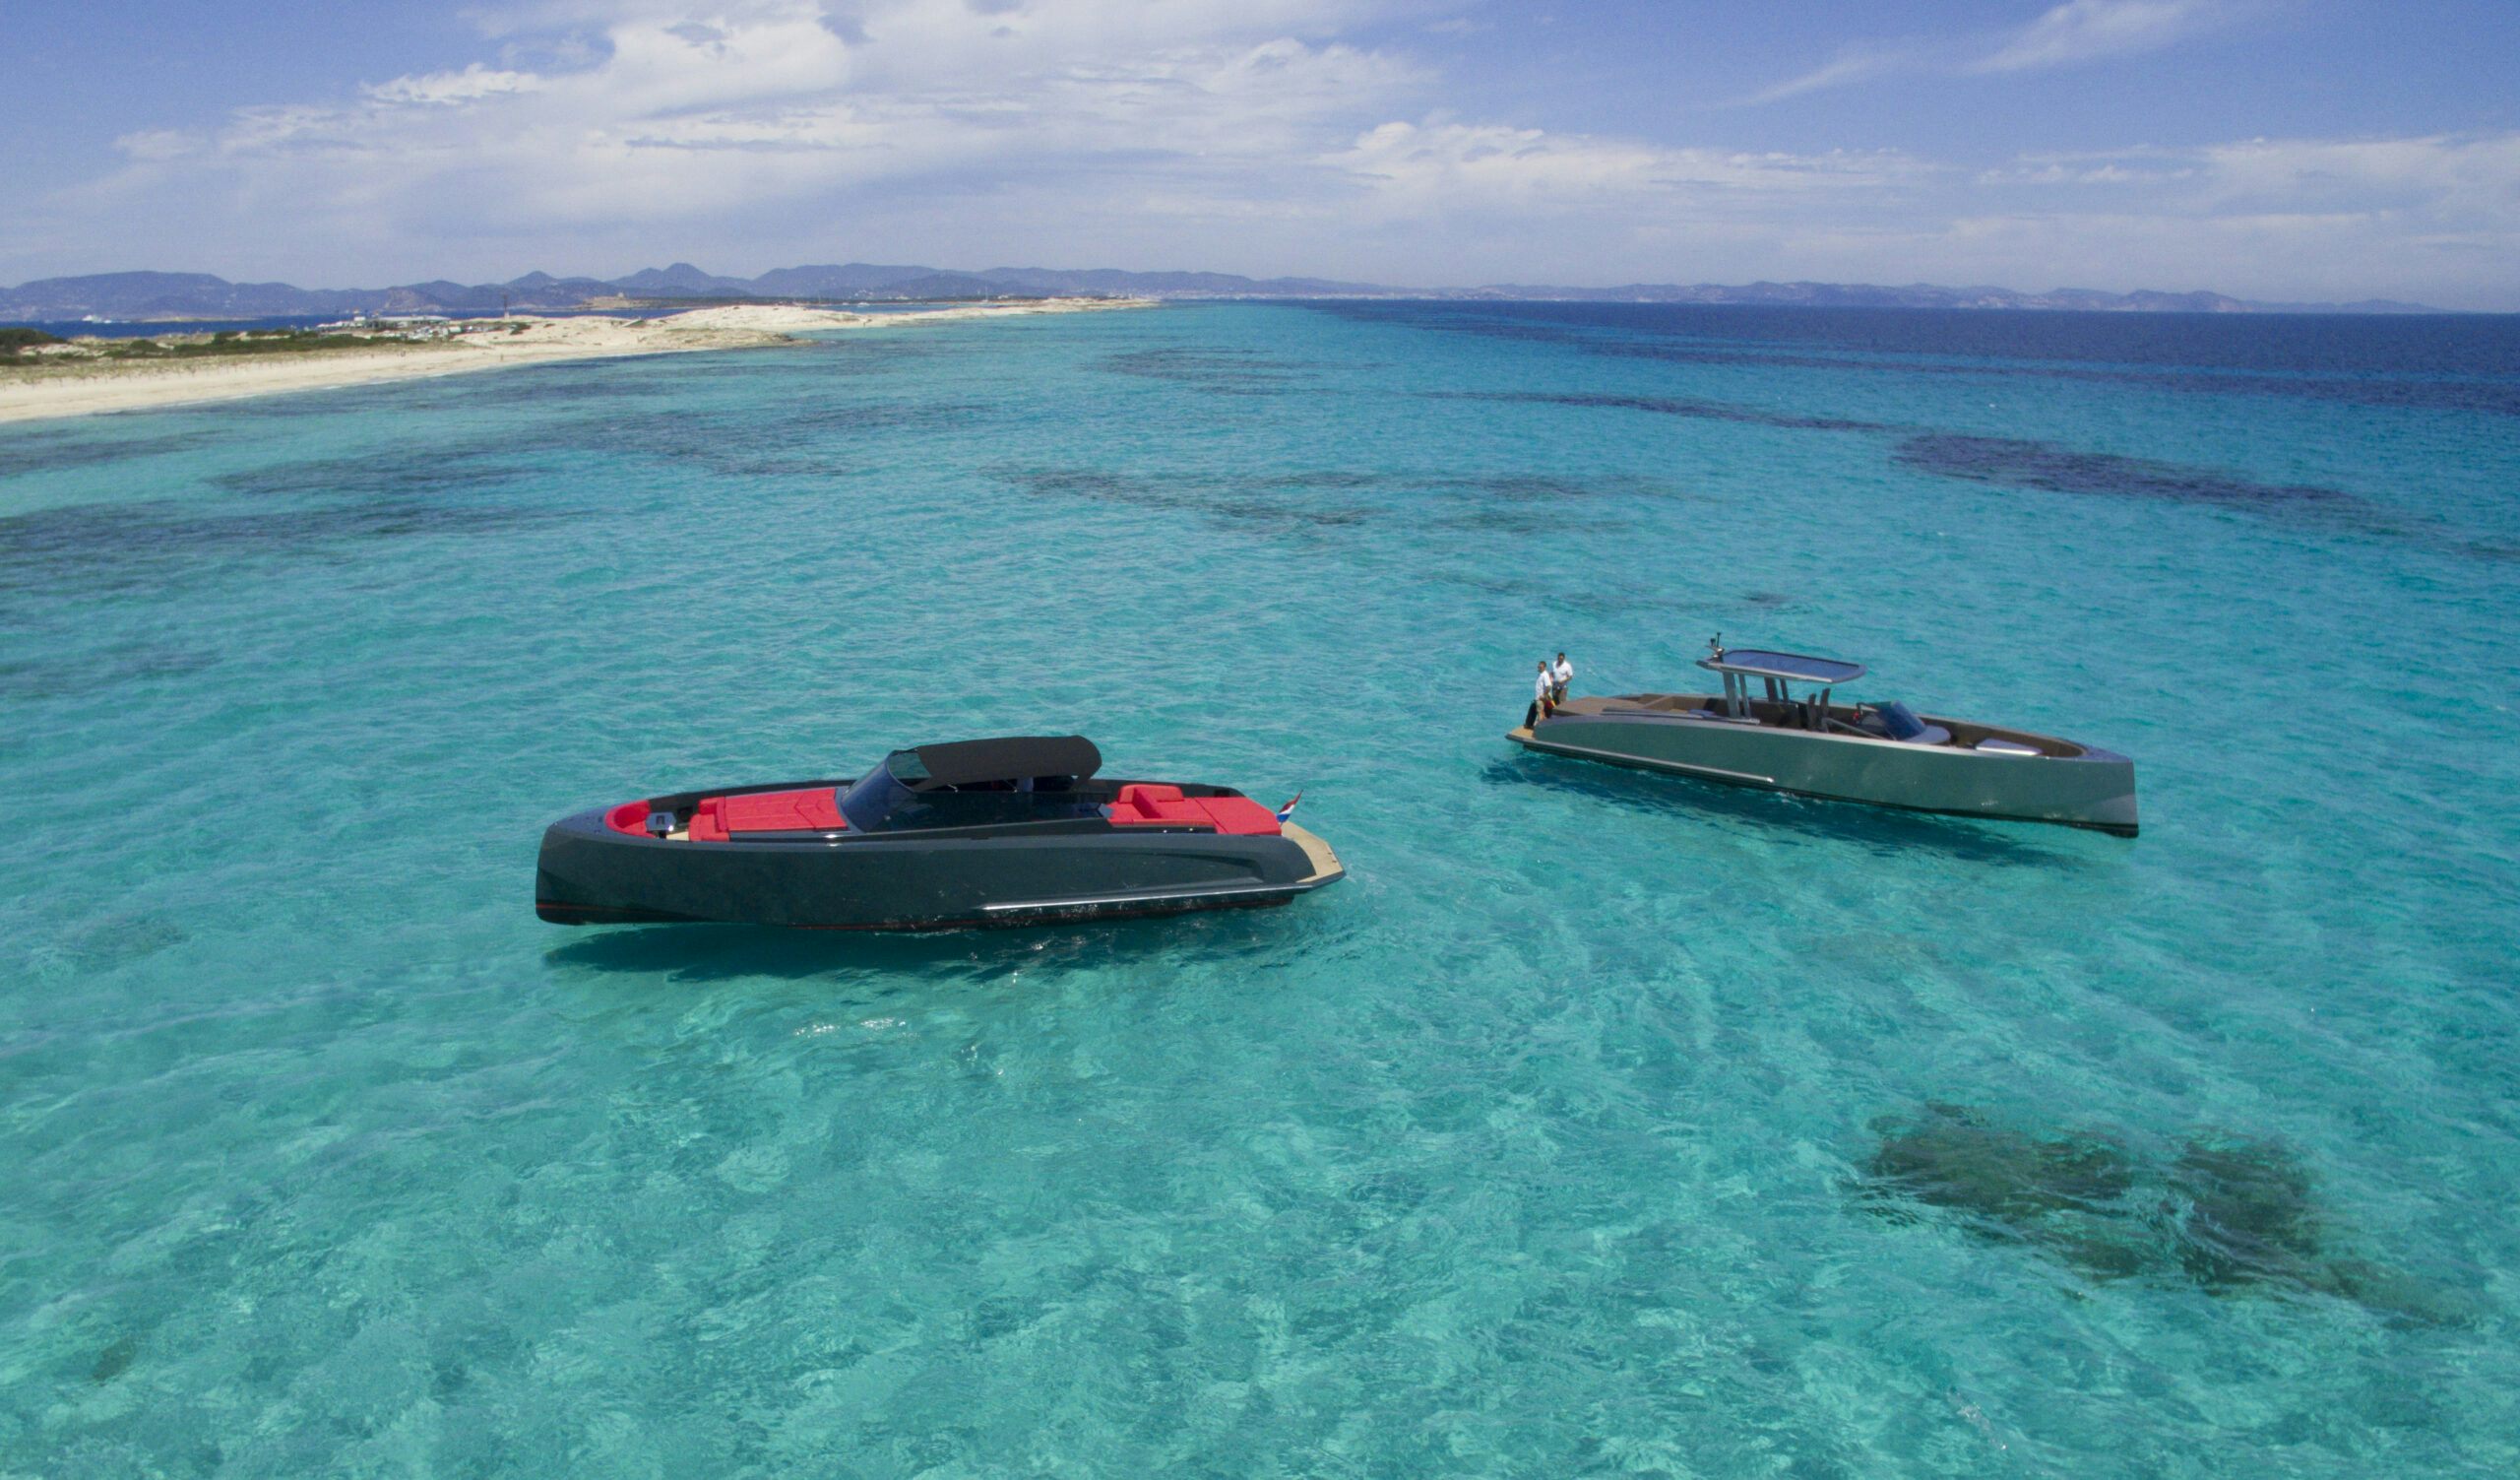 Charter your VQ yacht in Ibiza now